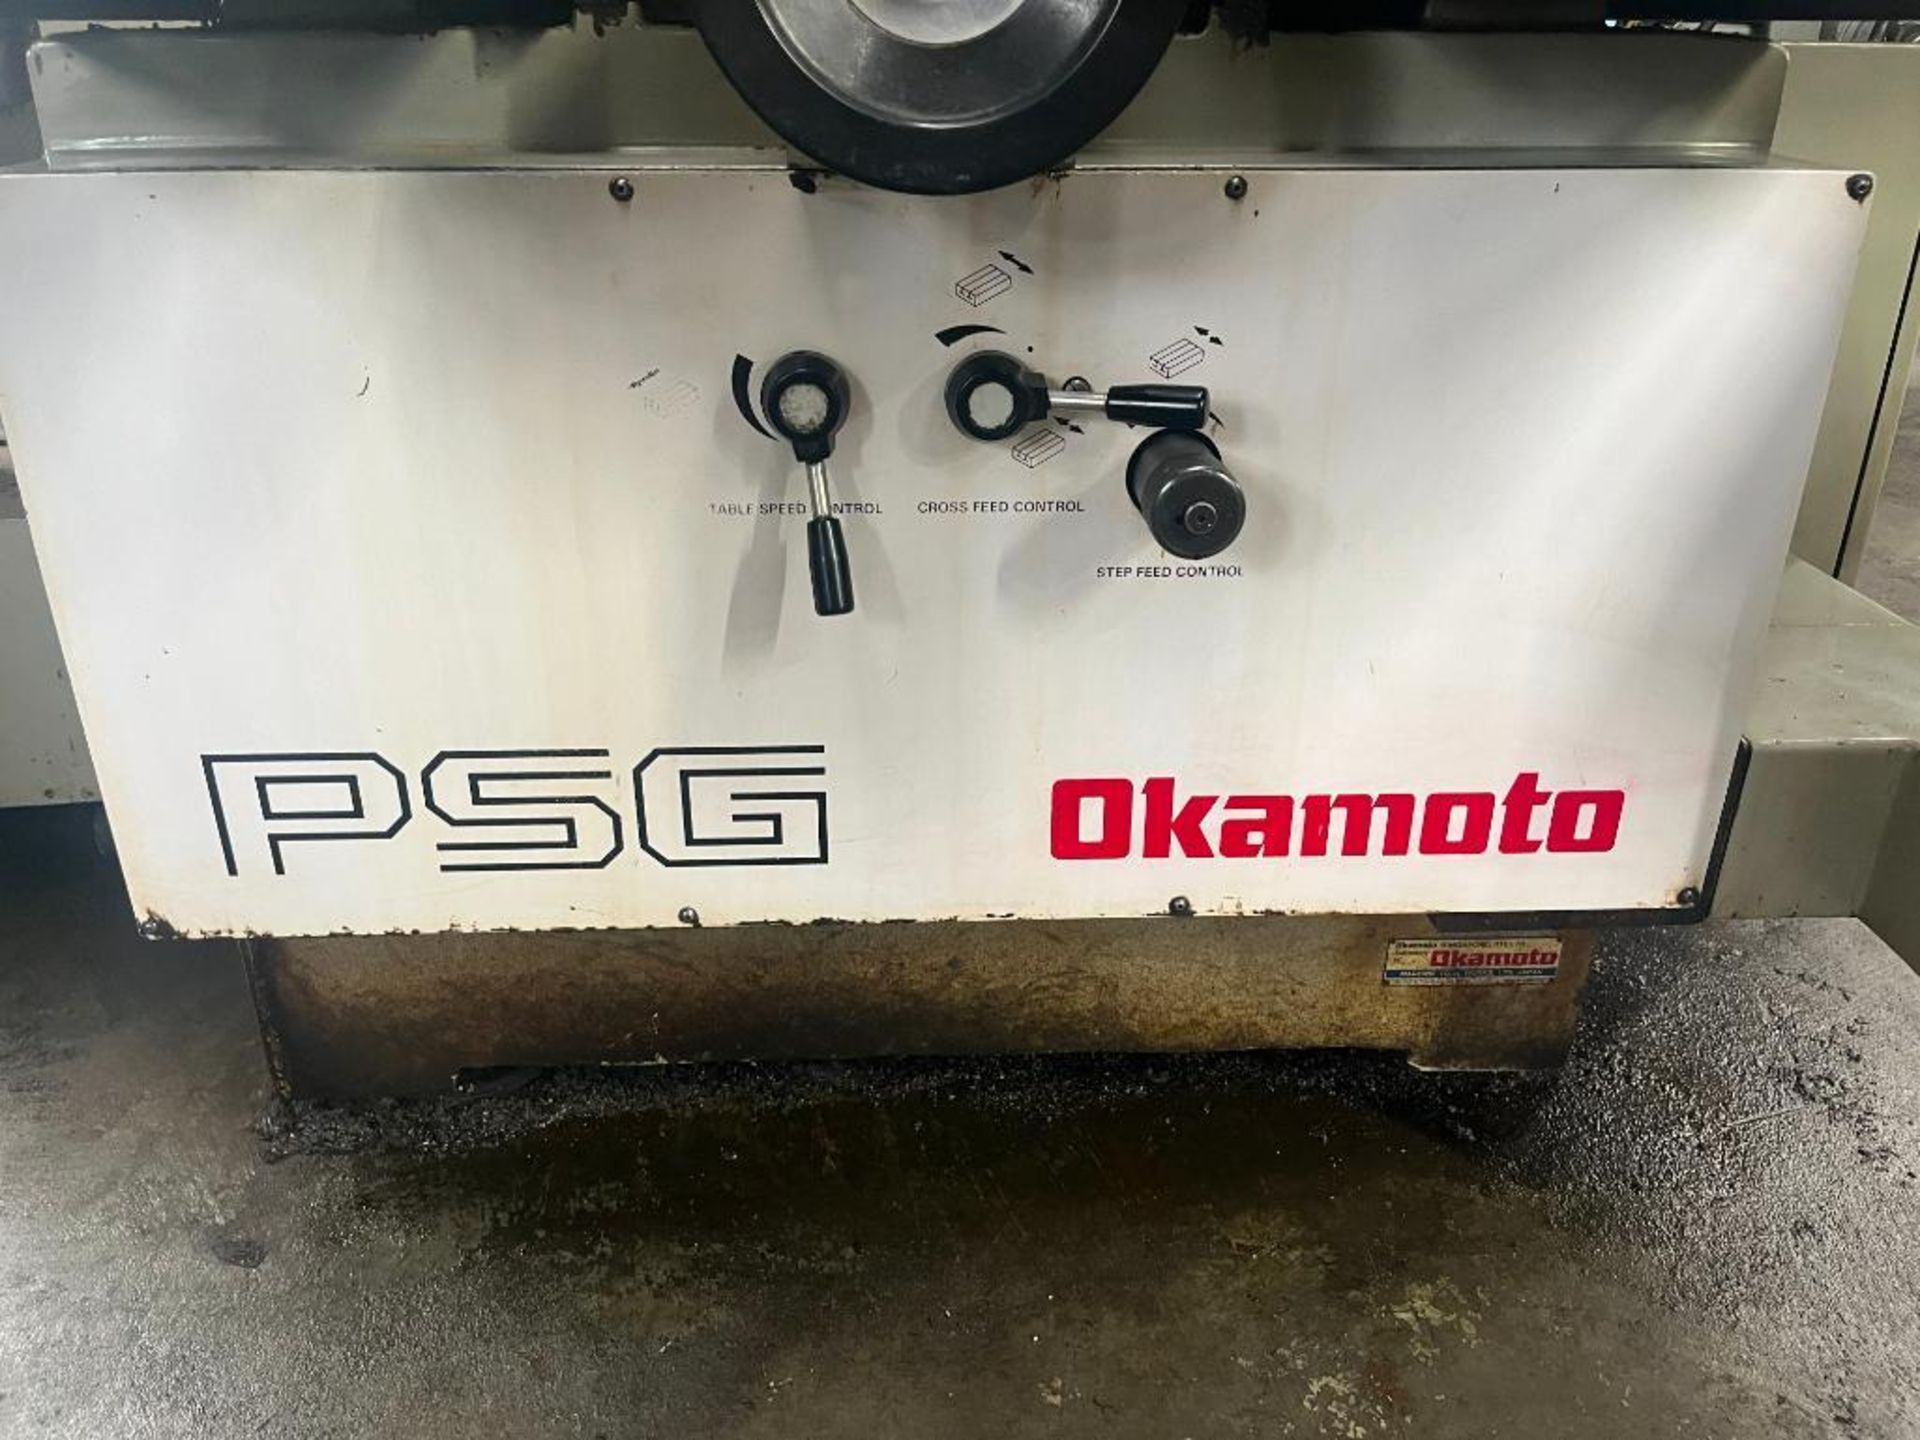 Okamoto PSG 20" x 24" Hydraulic Surface Grinder Model 2024DX, S/N 67030 with Chuck Control. 20" x 24 - Image 23 of 23